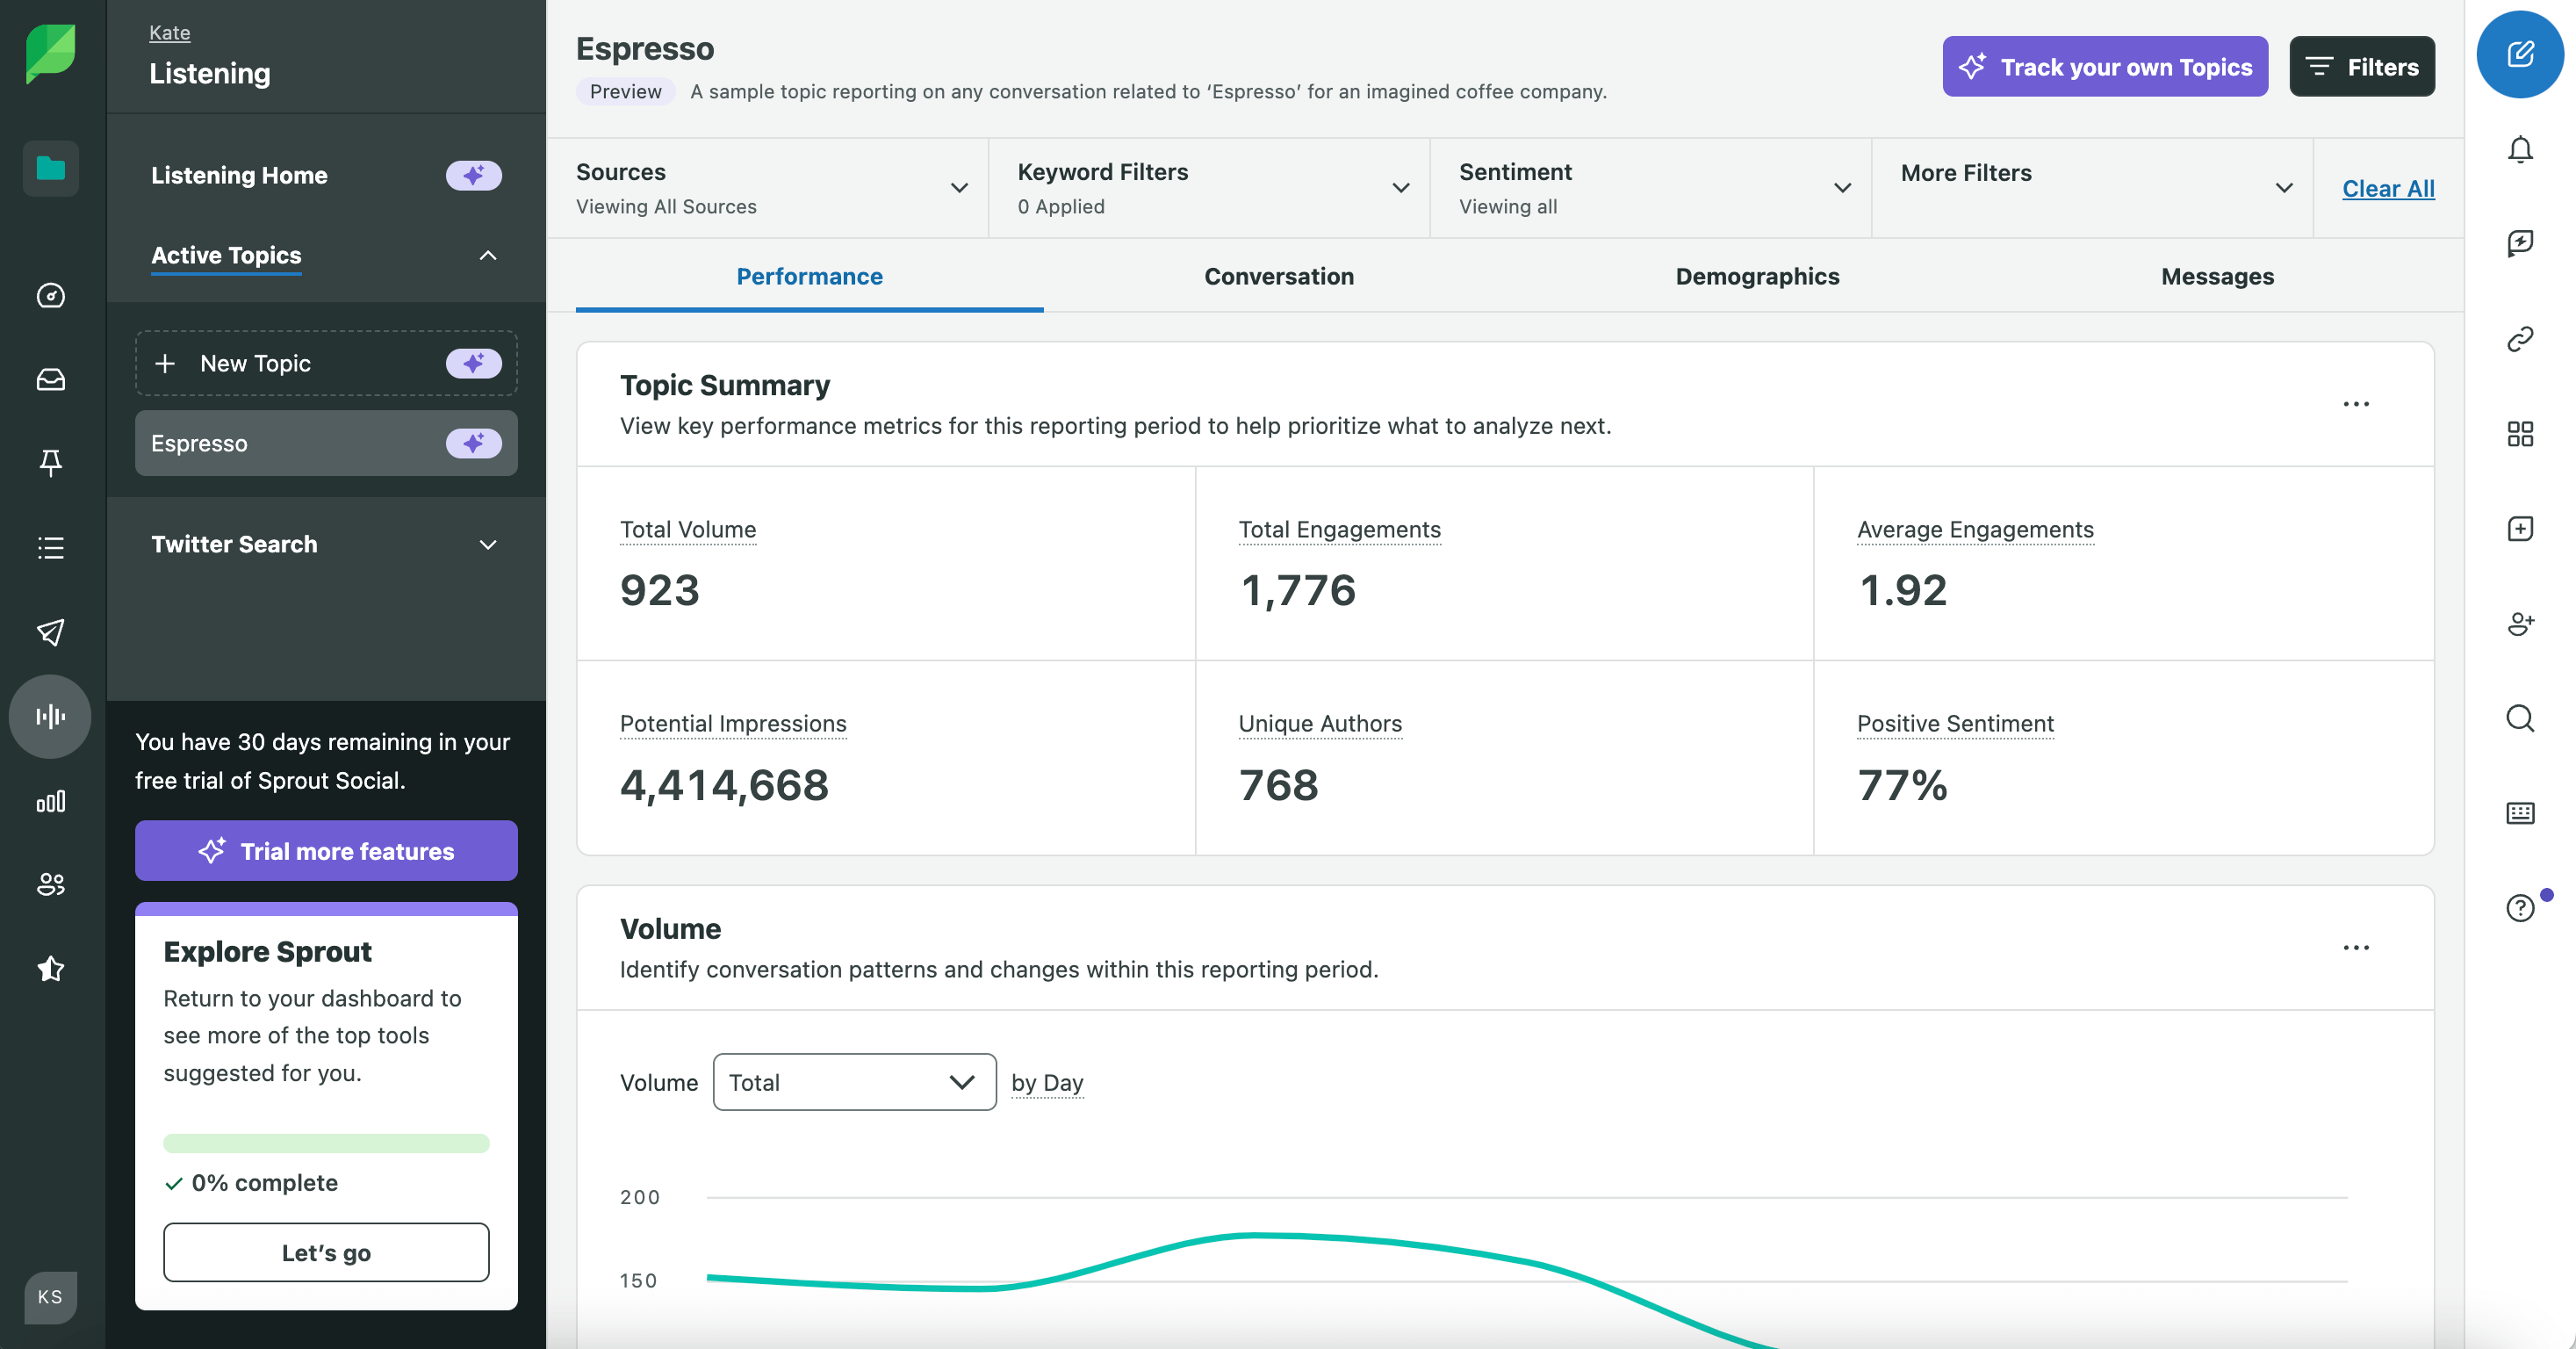 SproutSocial listening feature preview showing a performance summary for the word "espresso" with information such as Total volume, Total engagements, or Unique authors.